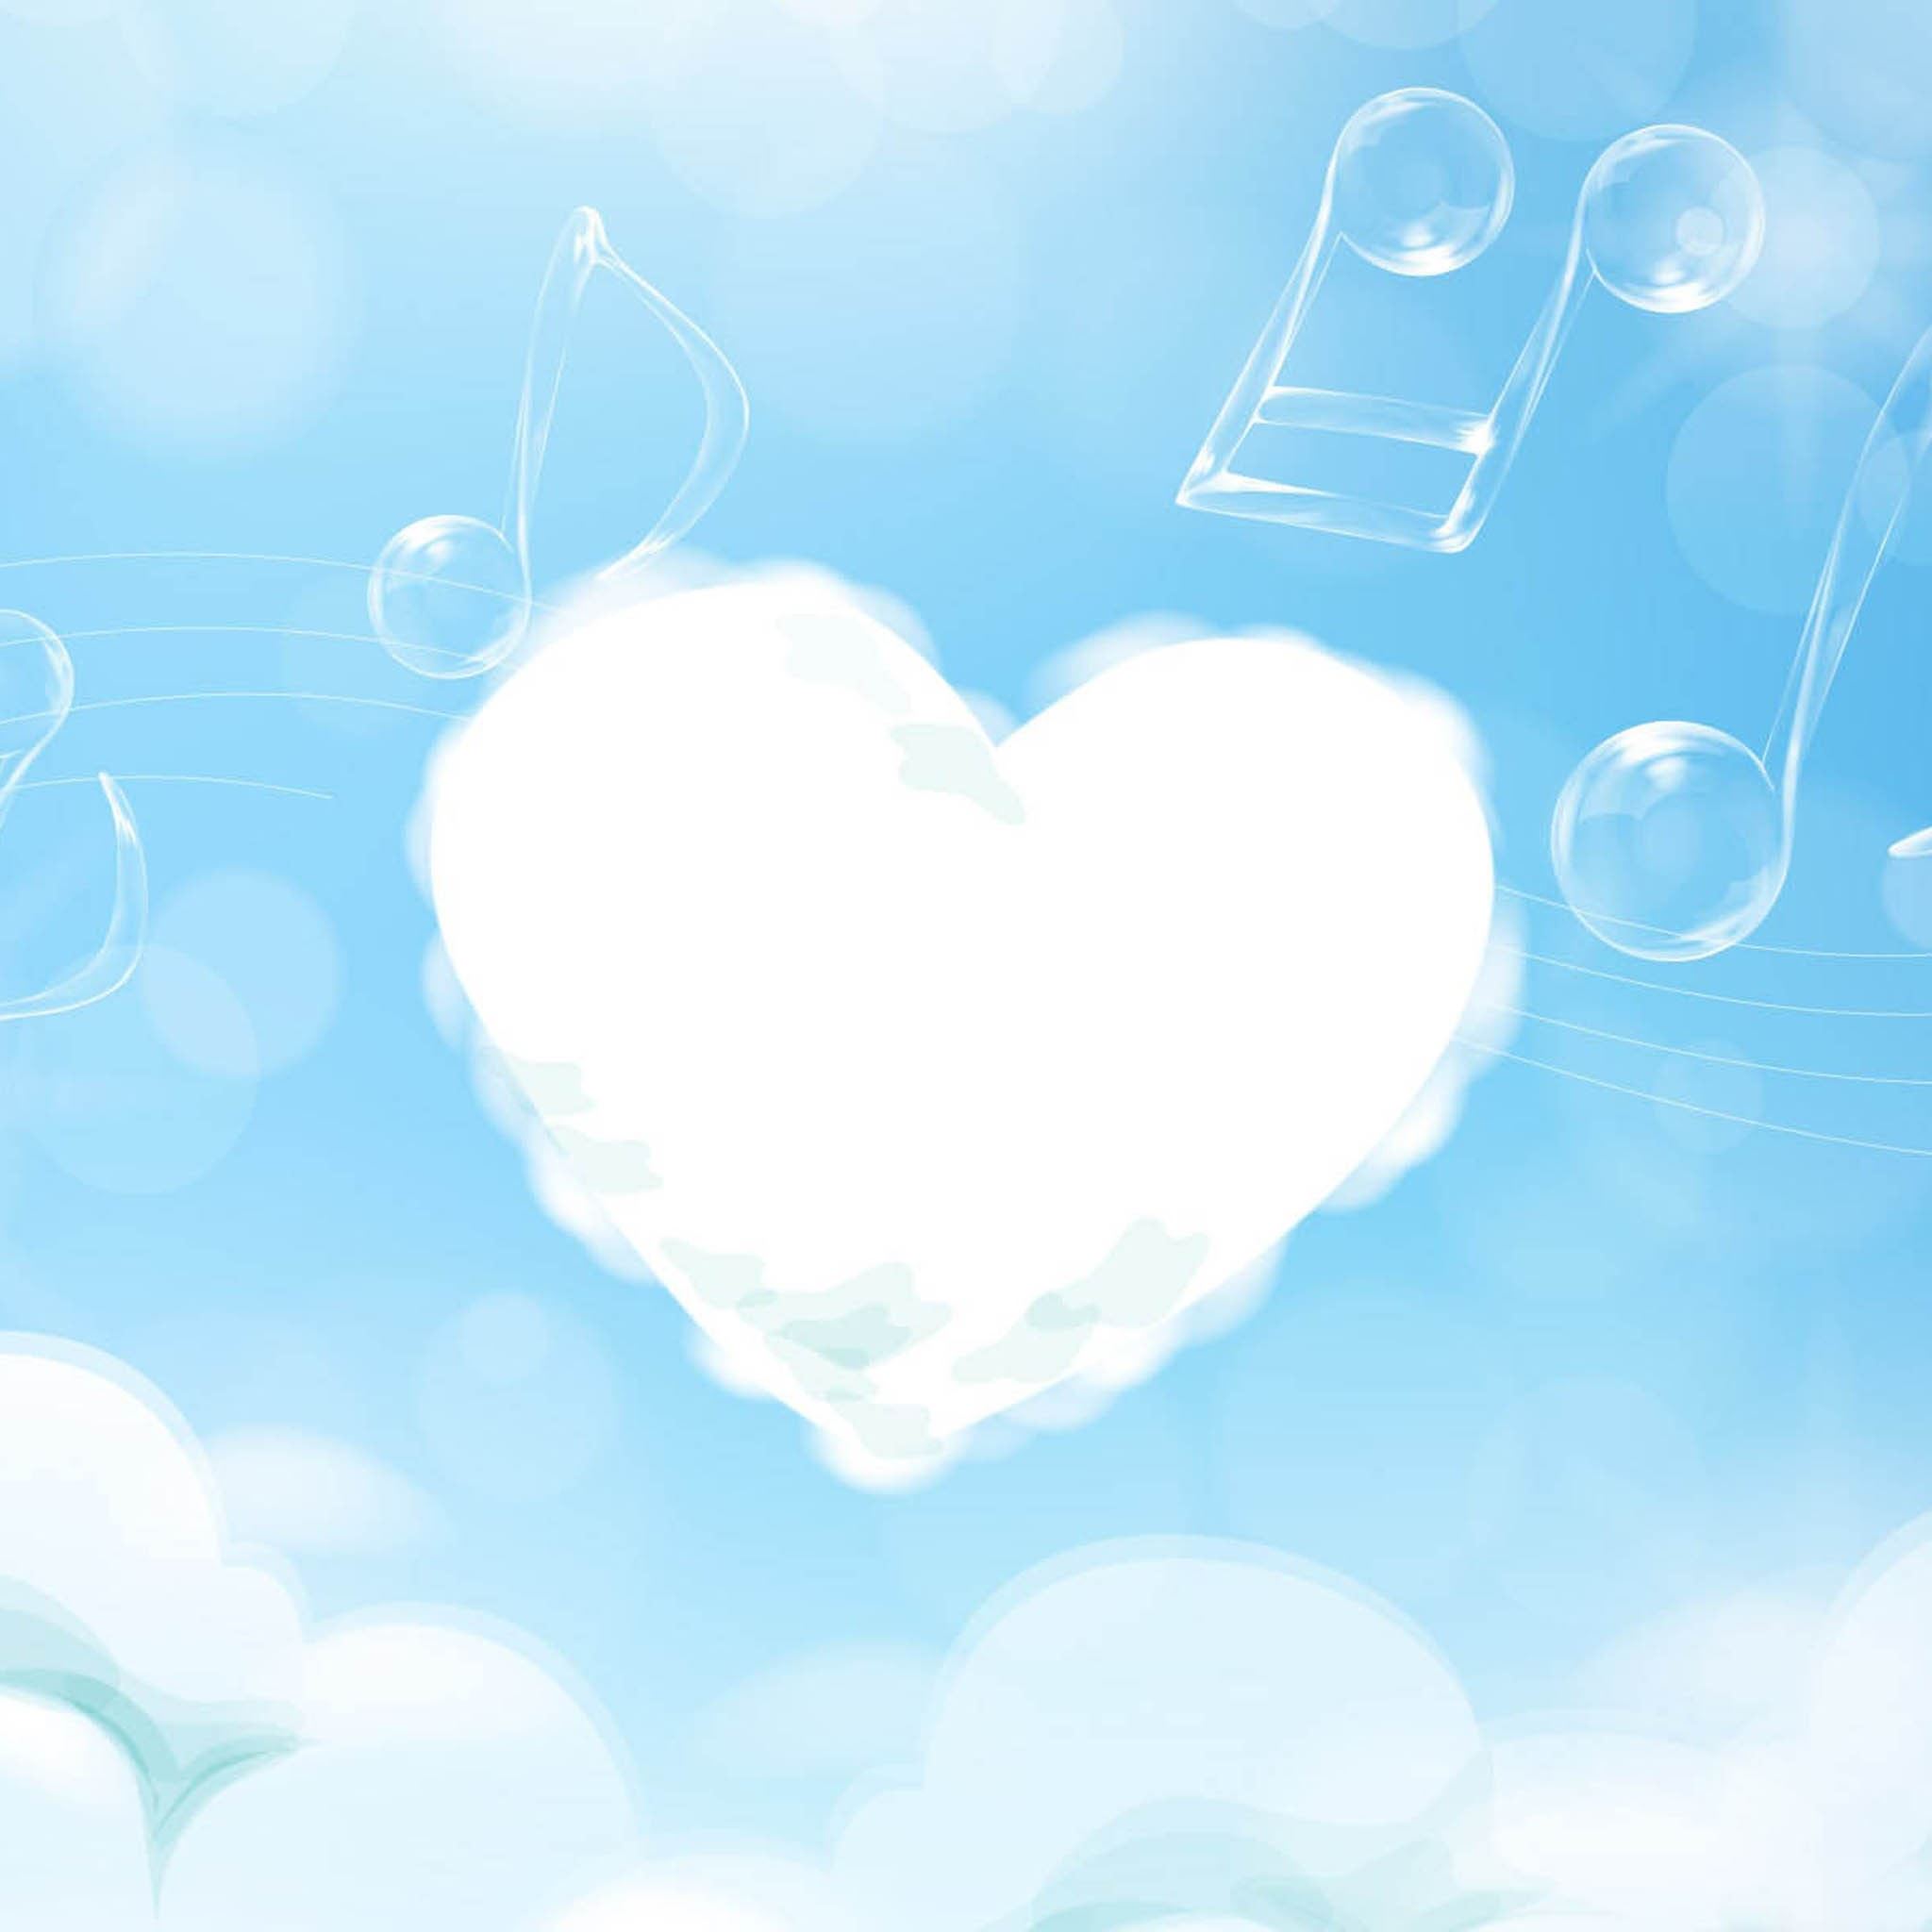 Love Is In The Sky iPad Air wallpaper 